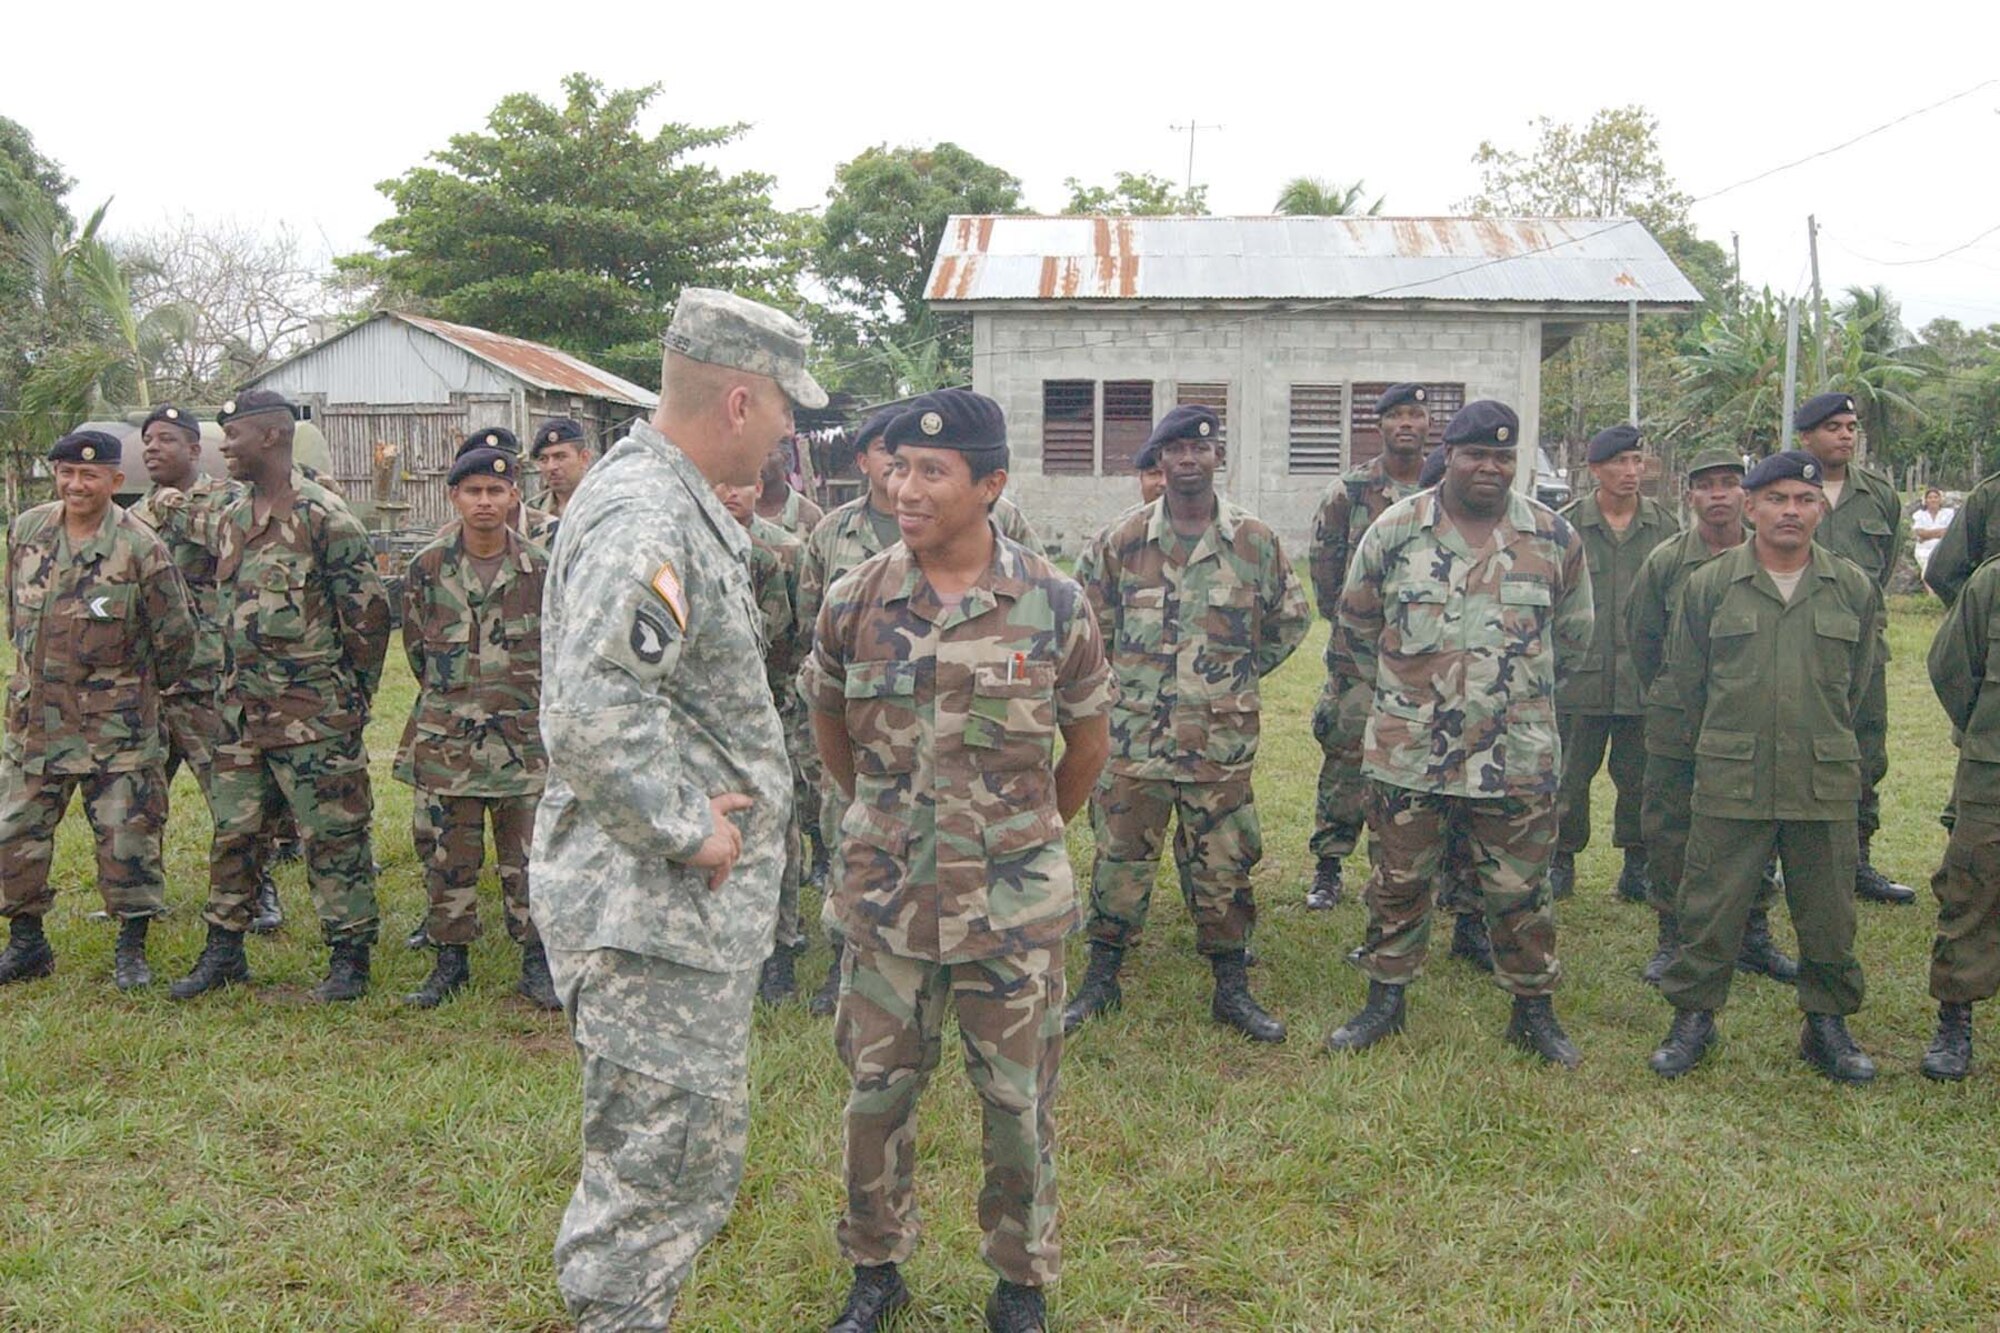 TRIAL FARM, Belize -- Army Col. Christopher Hughes, Joint Task Force-Bravo commander from Soto Cano Air Base, Honduras, talks with a member of the Belize Defense Force during the New Horizons Belize 2007 opening ceremonies. Active-duty and Guard Soldiers, Sailors and Airmen will work shoulder to shoulder with members of the Belize Defense Force during New Horizons Belize 2007.  (U.S. Air Force photo/Staff Sgt. Chyenne Griffin)
